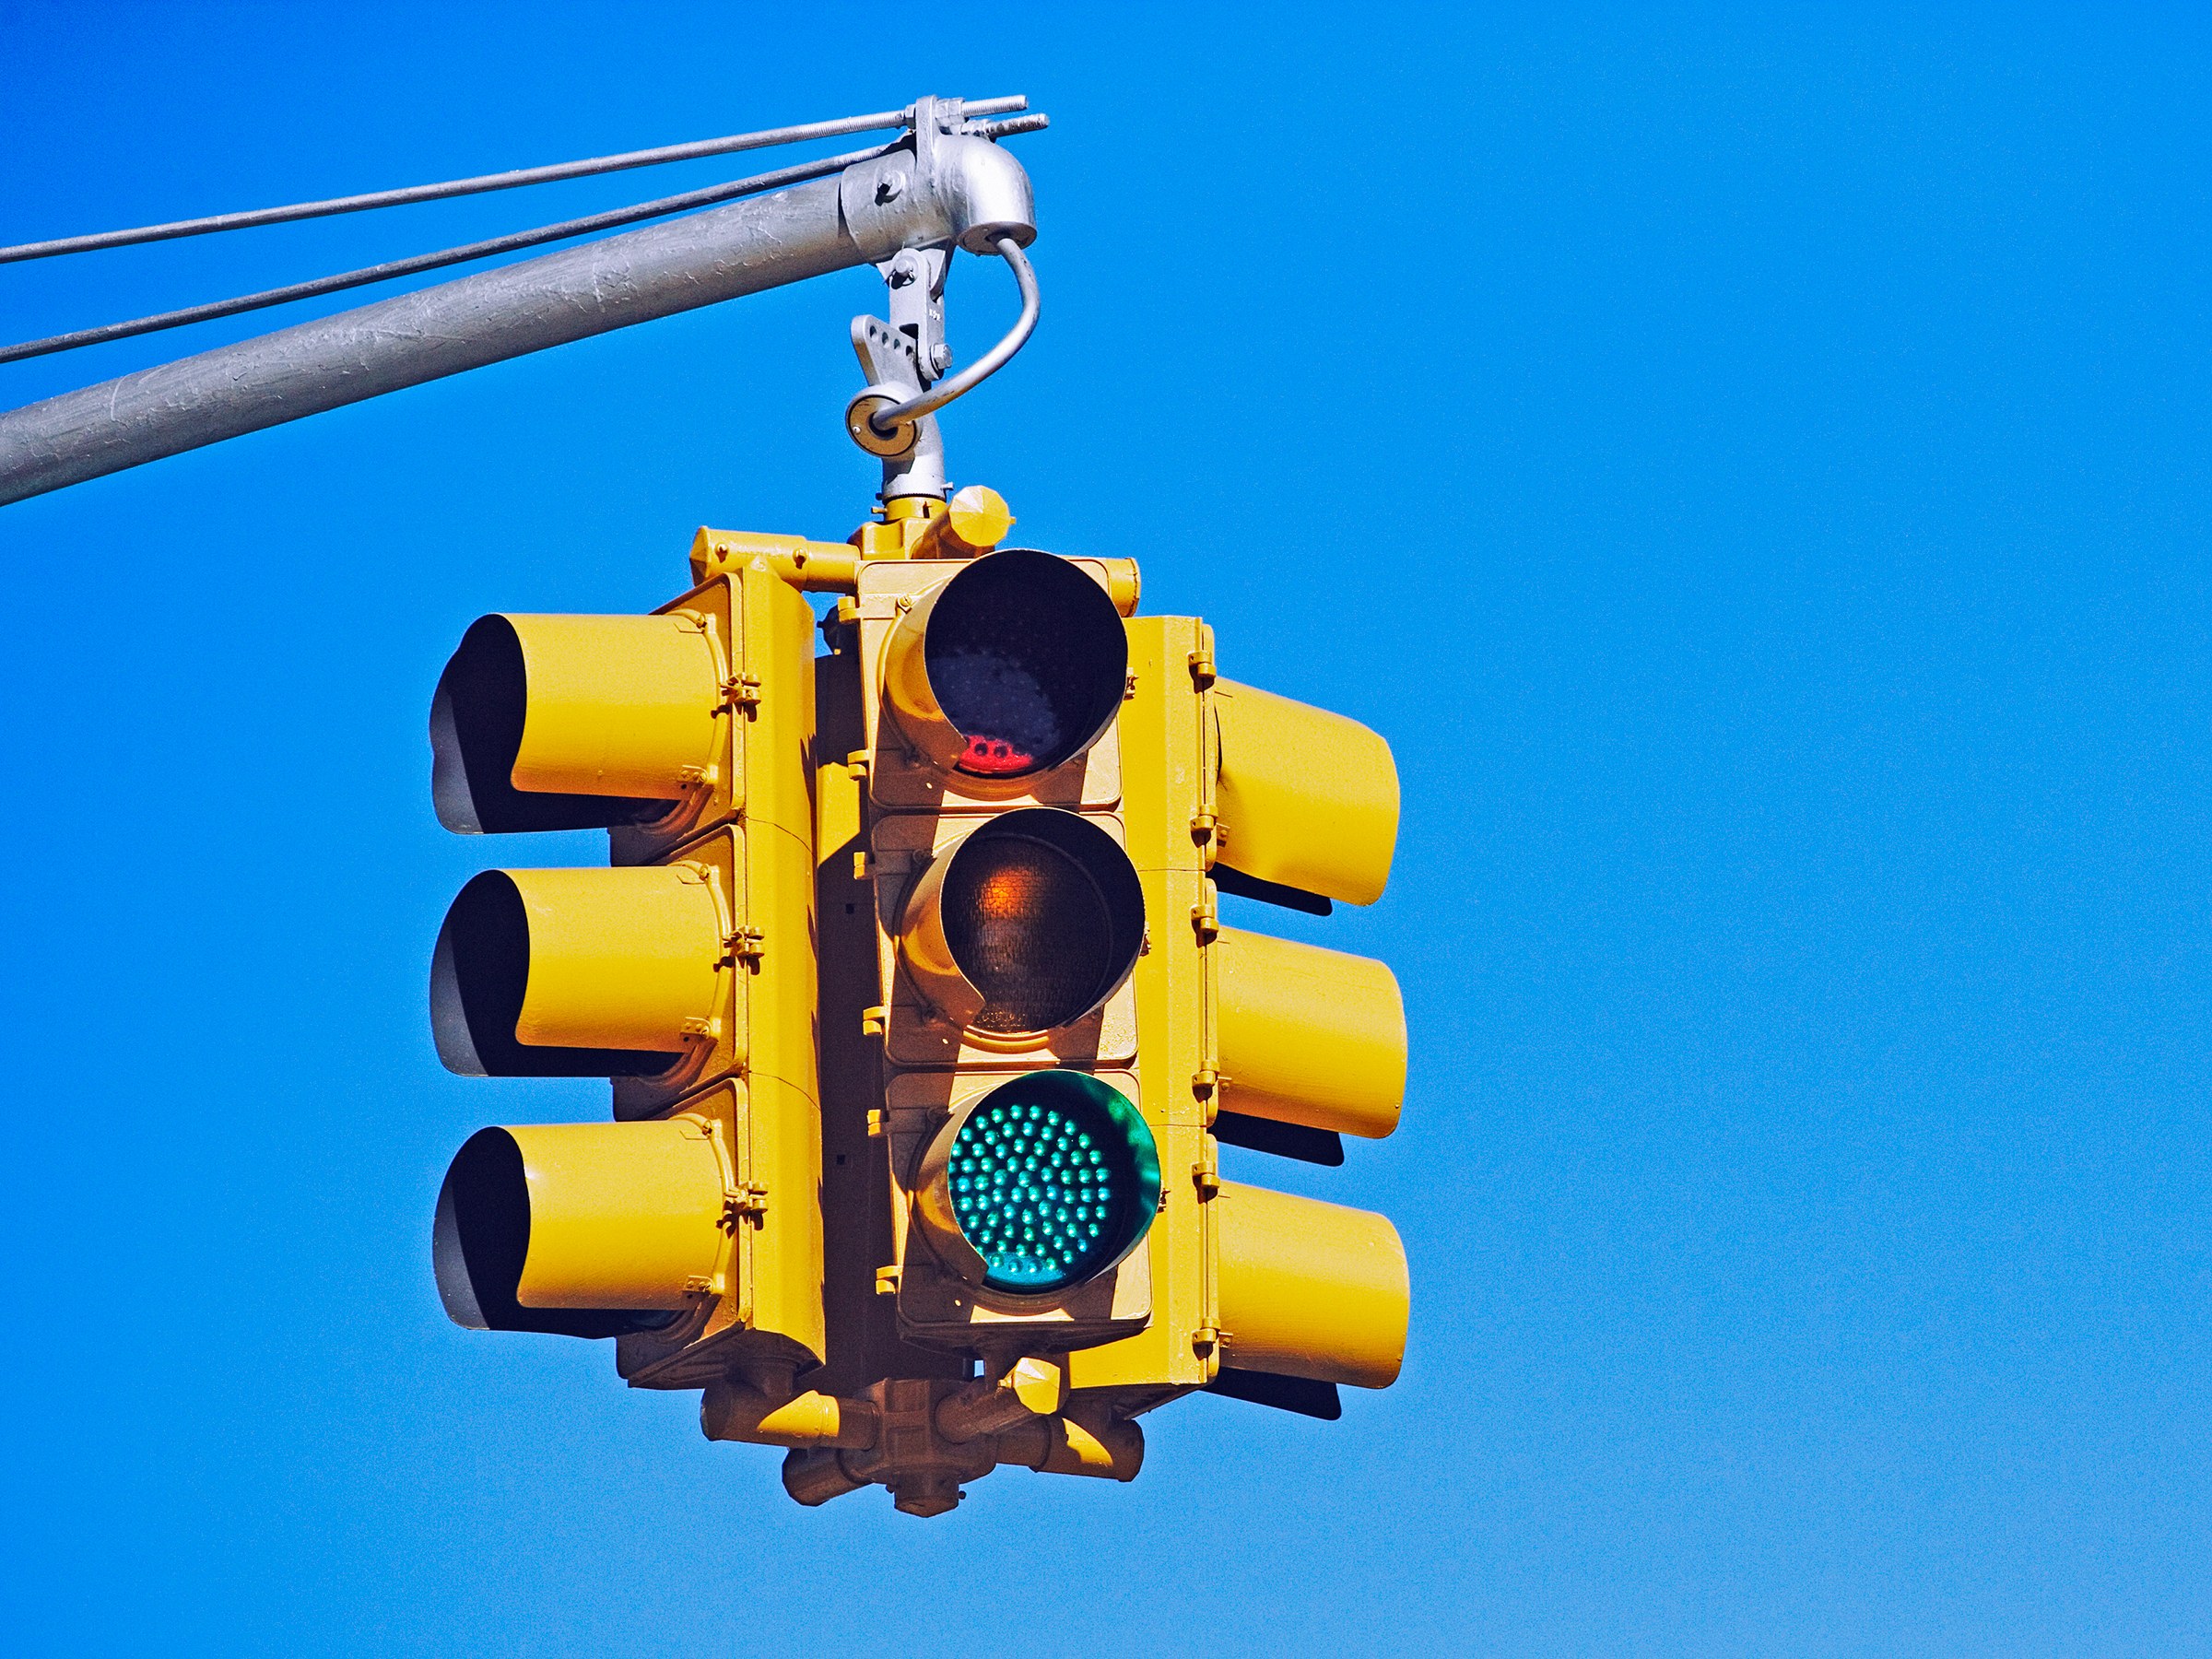 San Jose Tests Connected Signals' Traffic Light Predicting App | WIRED